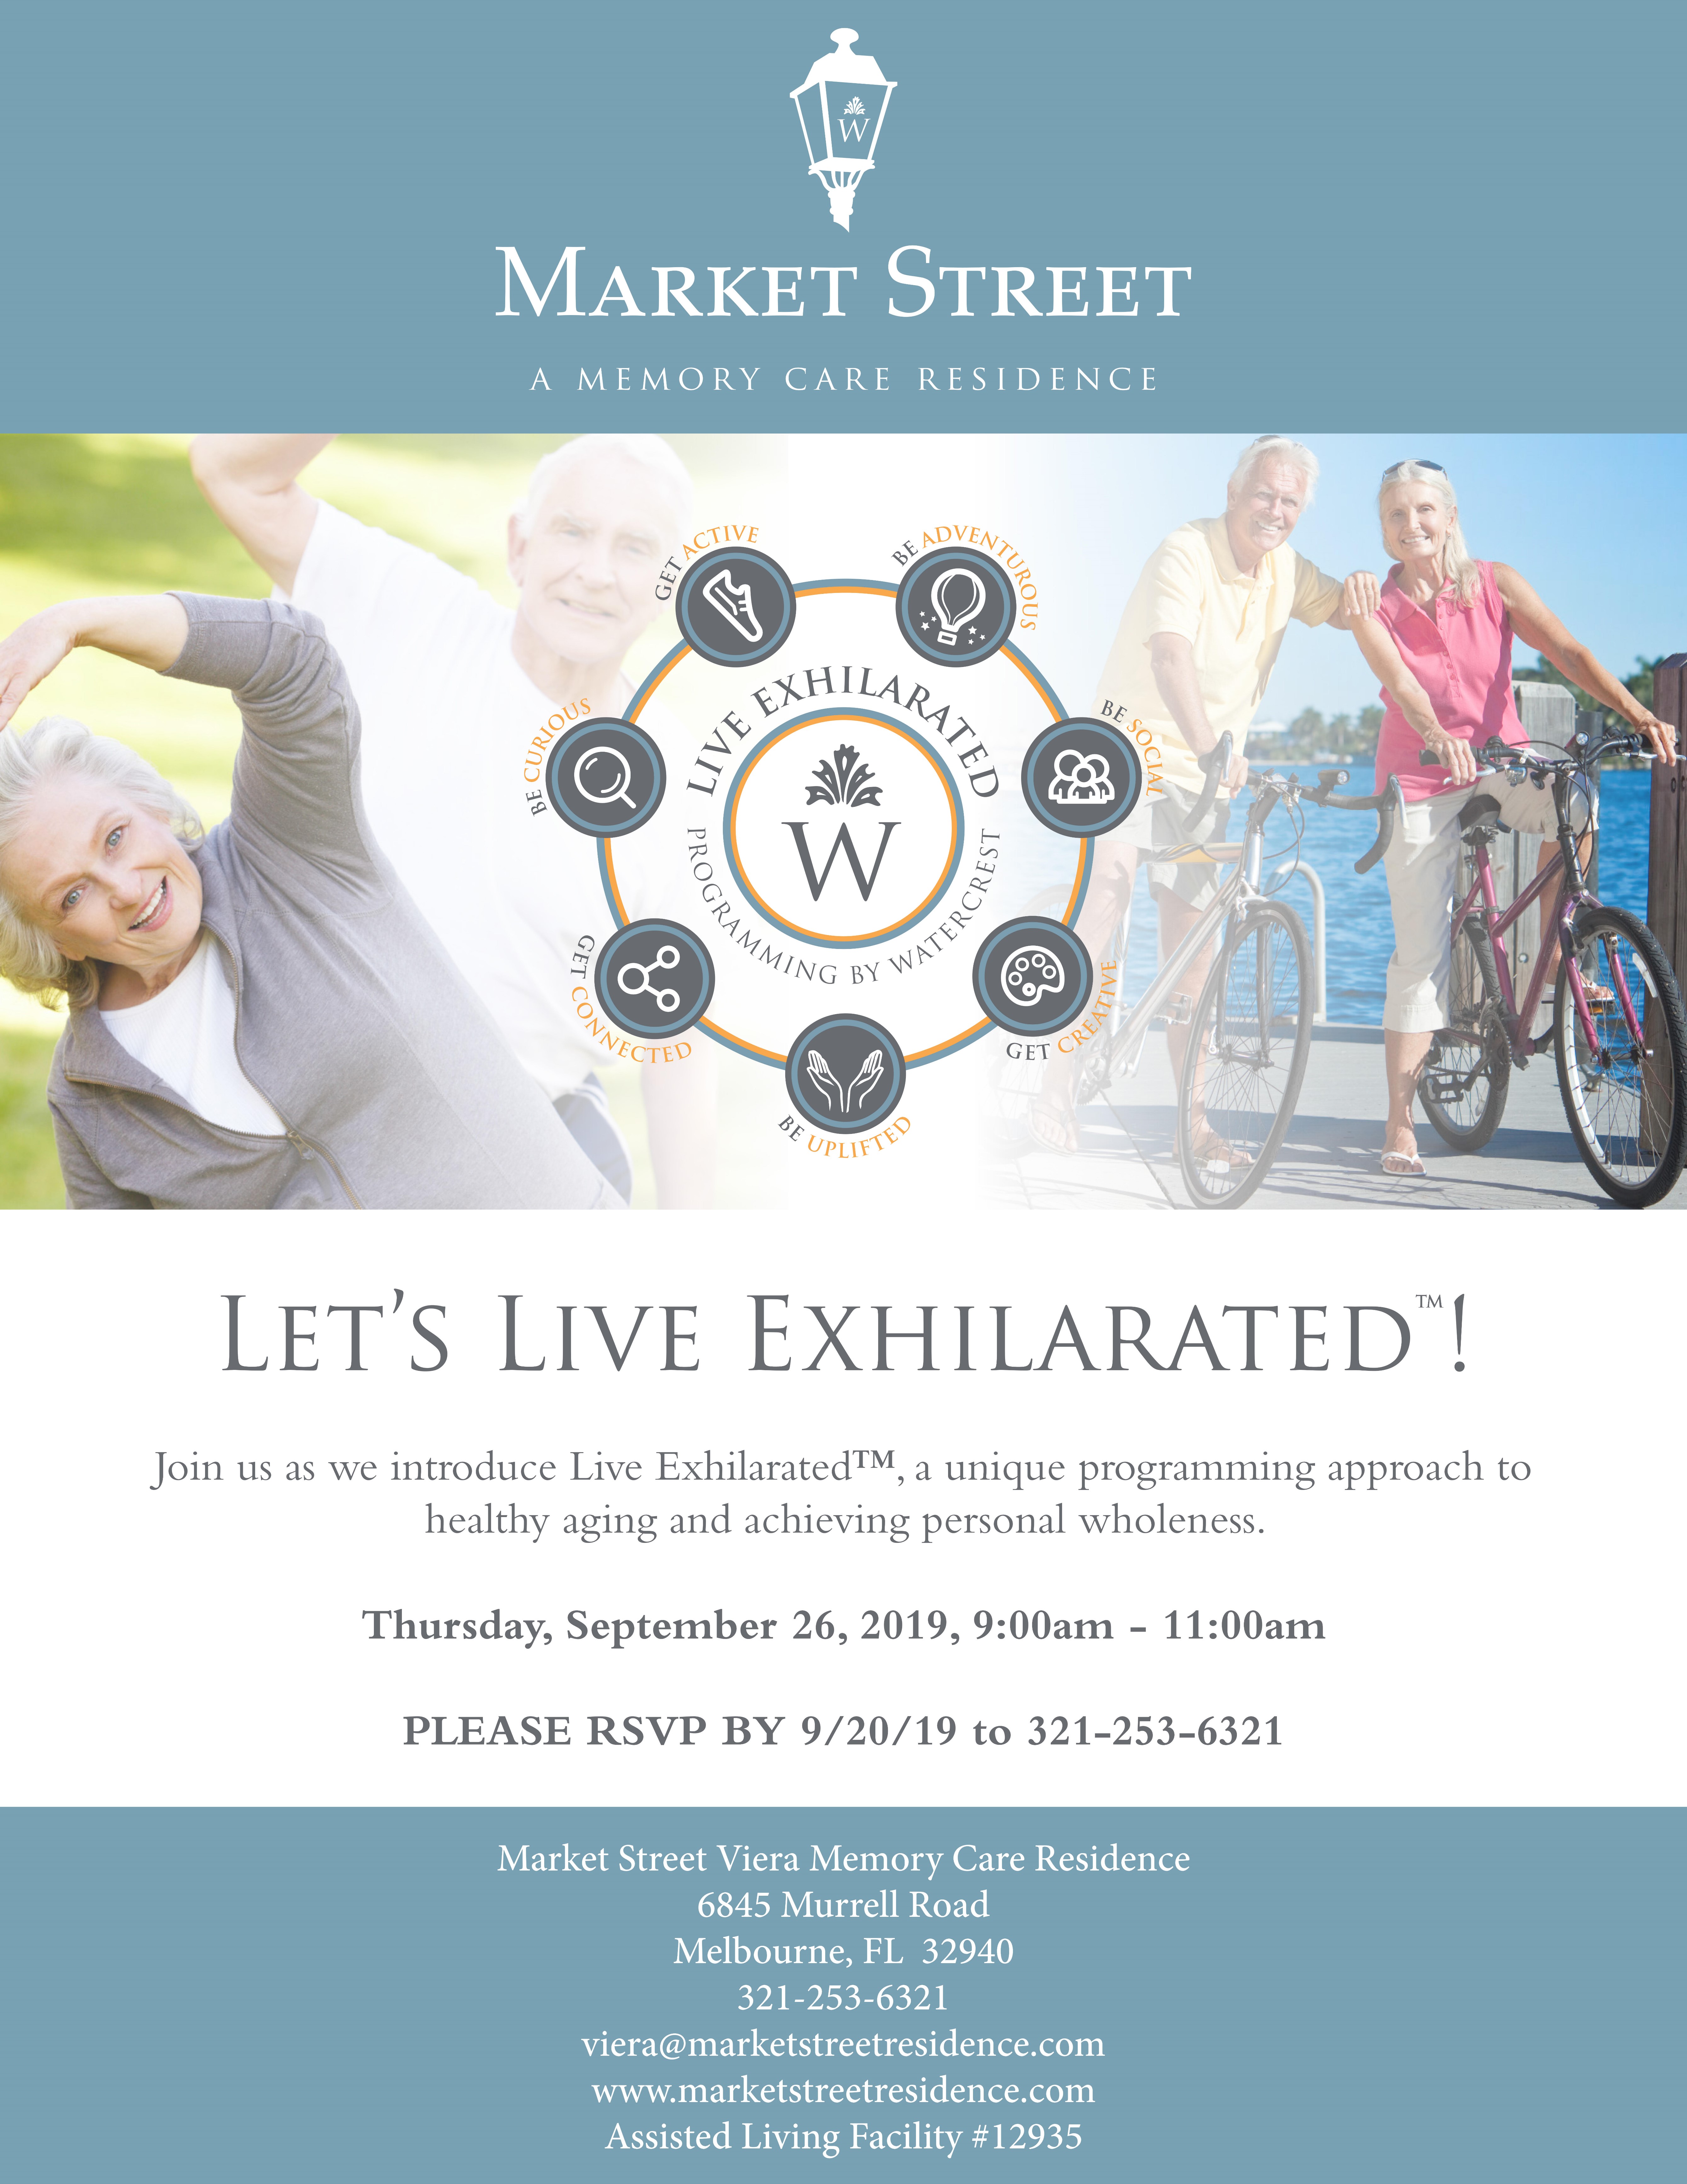 Let's Live Exhilarated! at Market Street